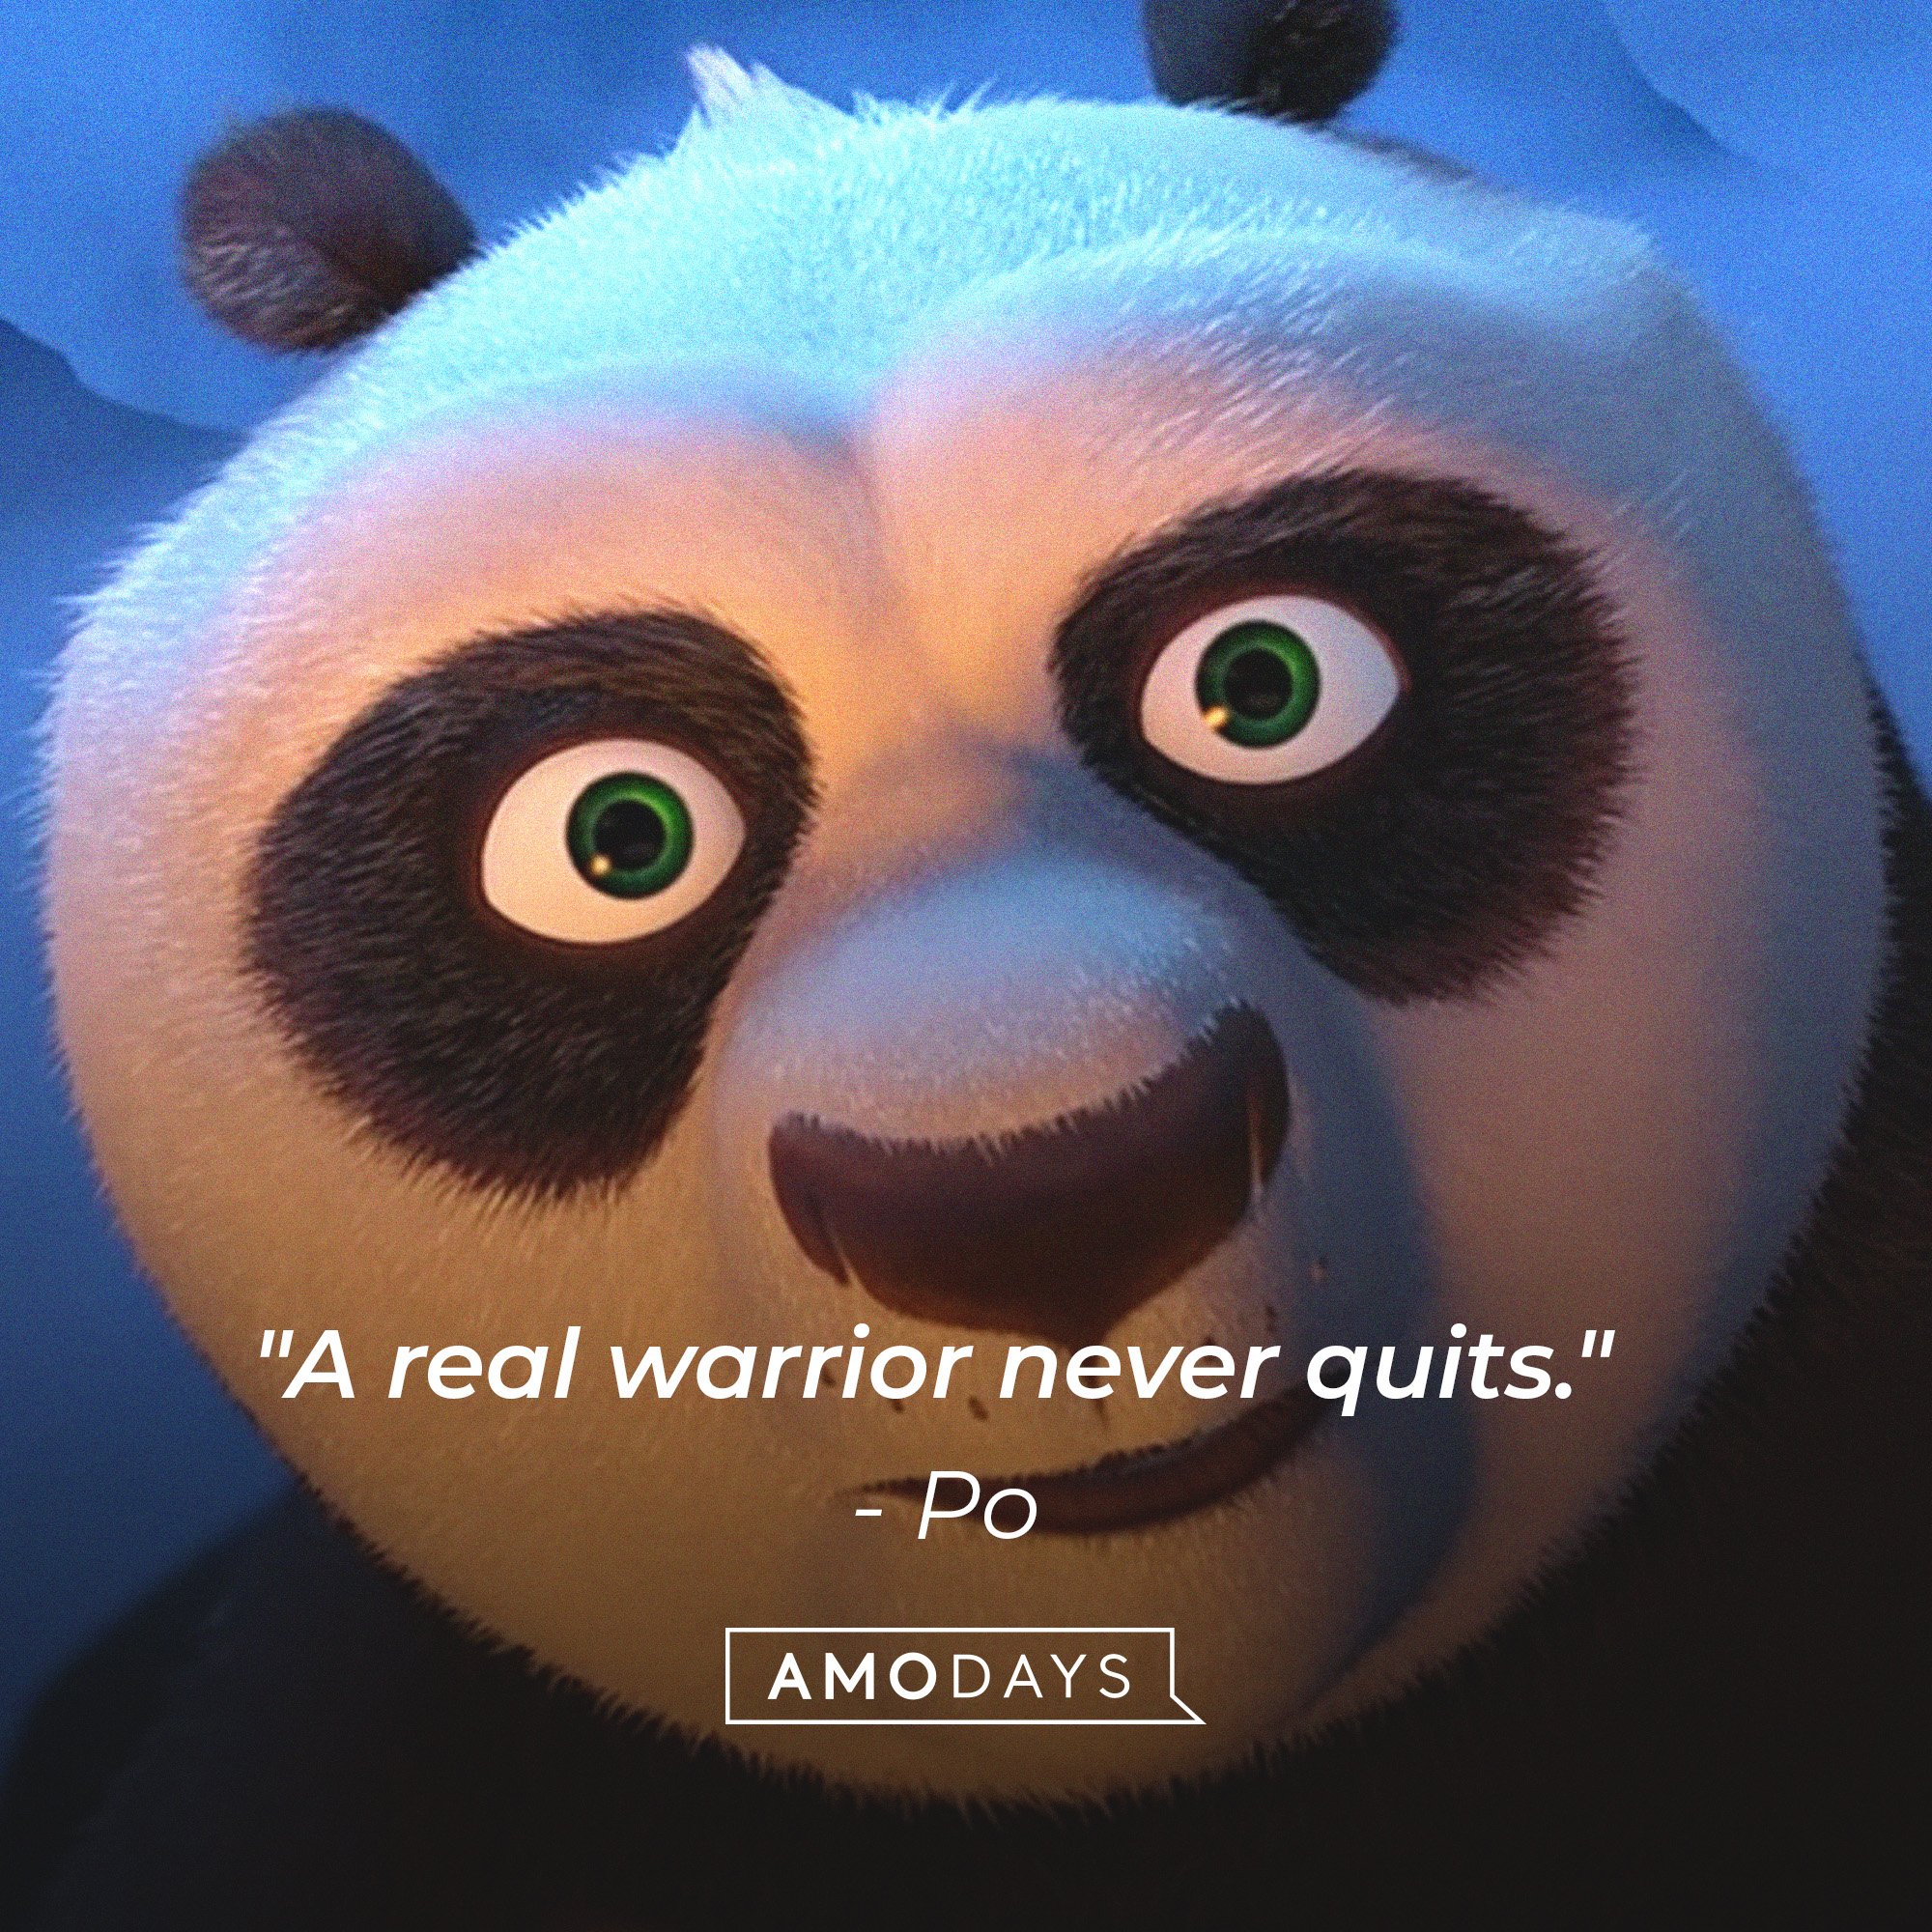  Po’s quote: "A real warrior never quits."  | Image: AmoDays